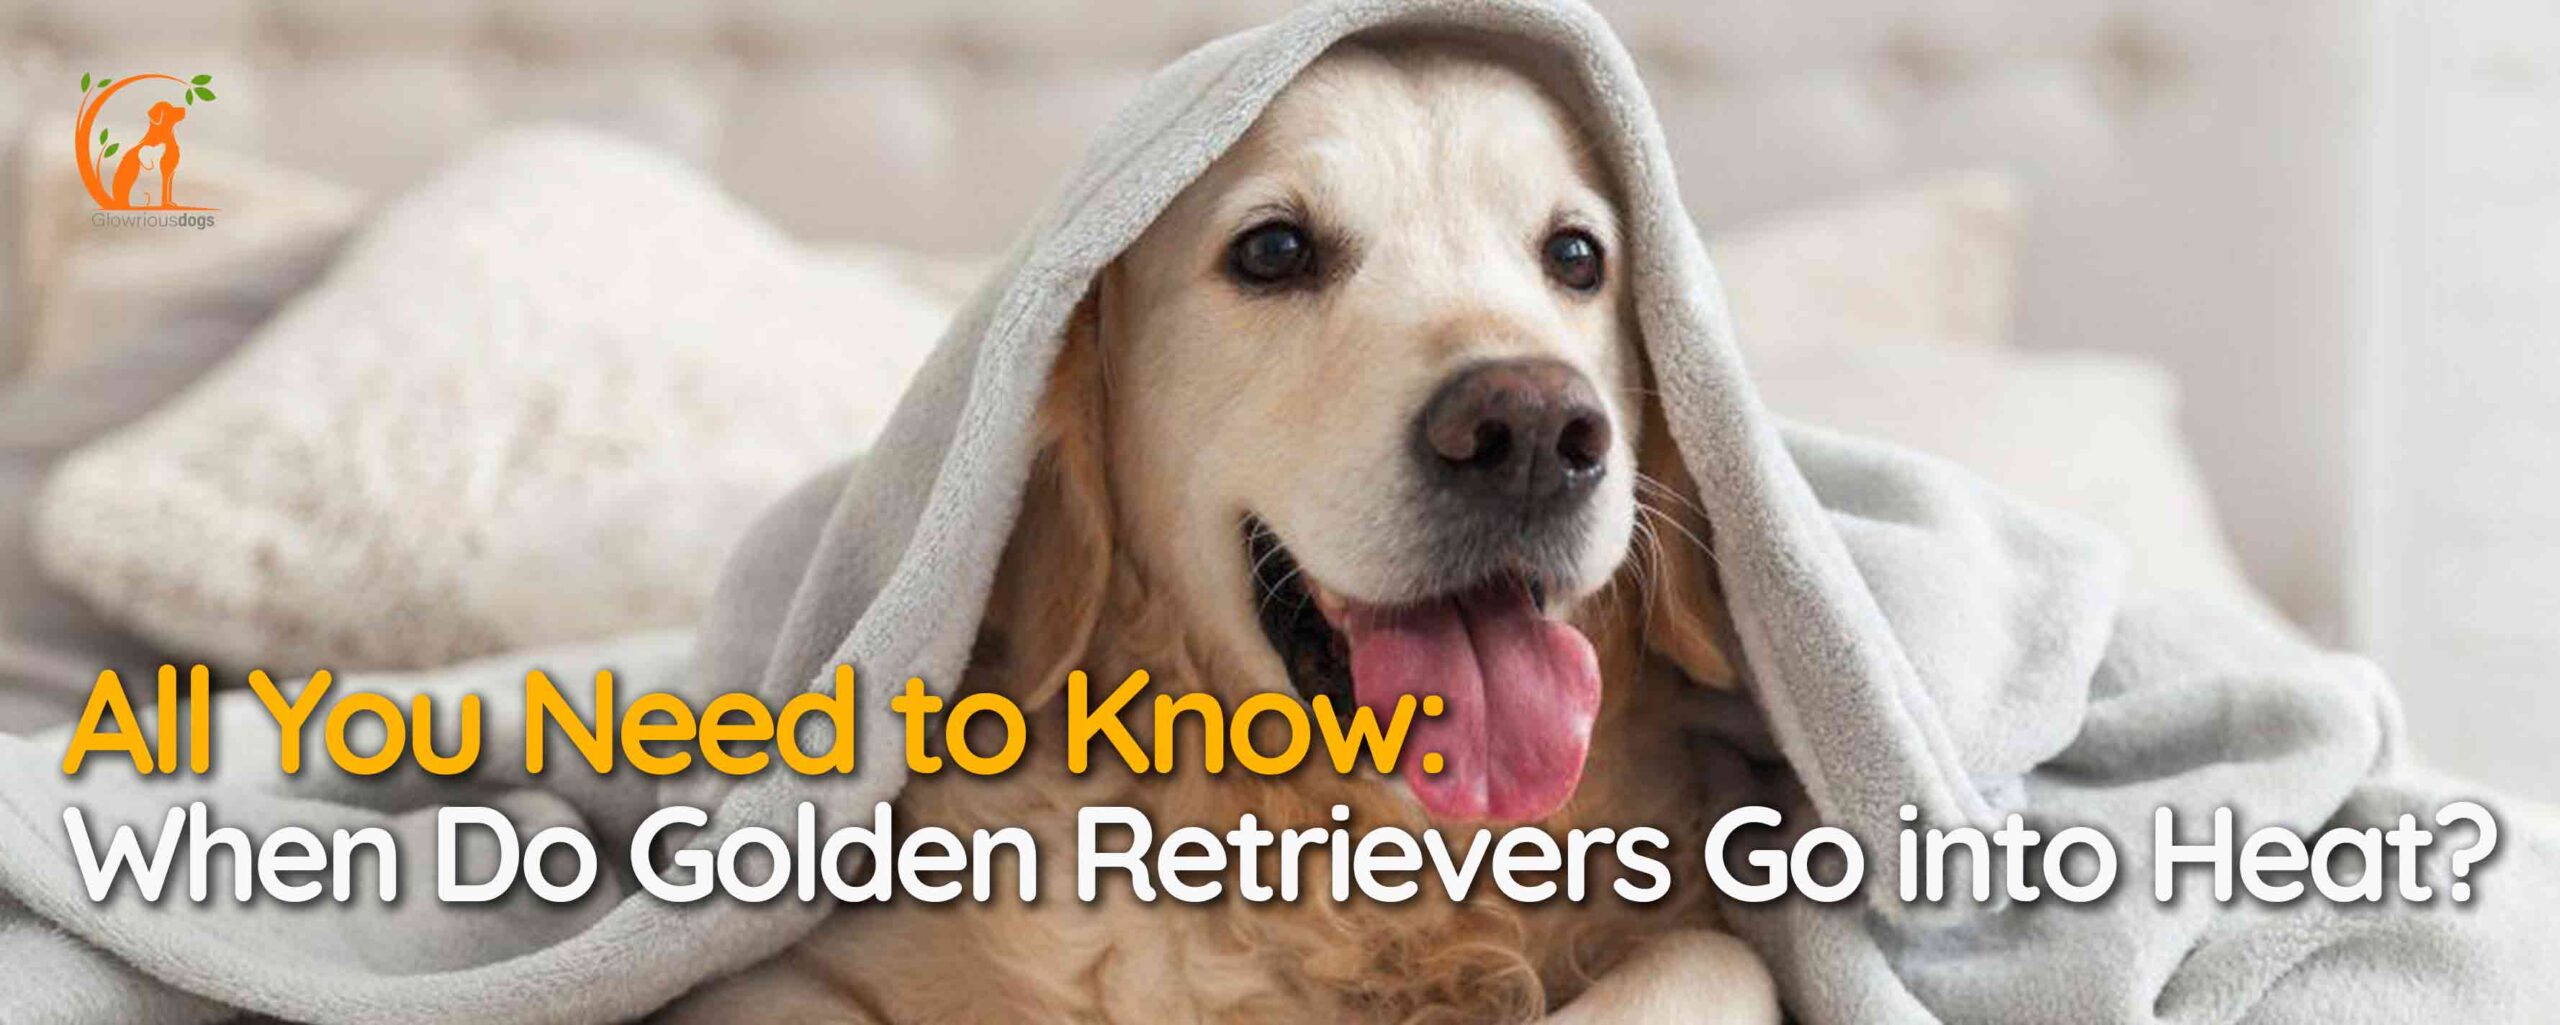 All You Need to Know: When Do Golden Retrievers Go into Heat?